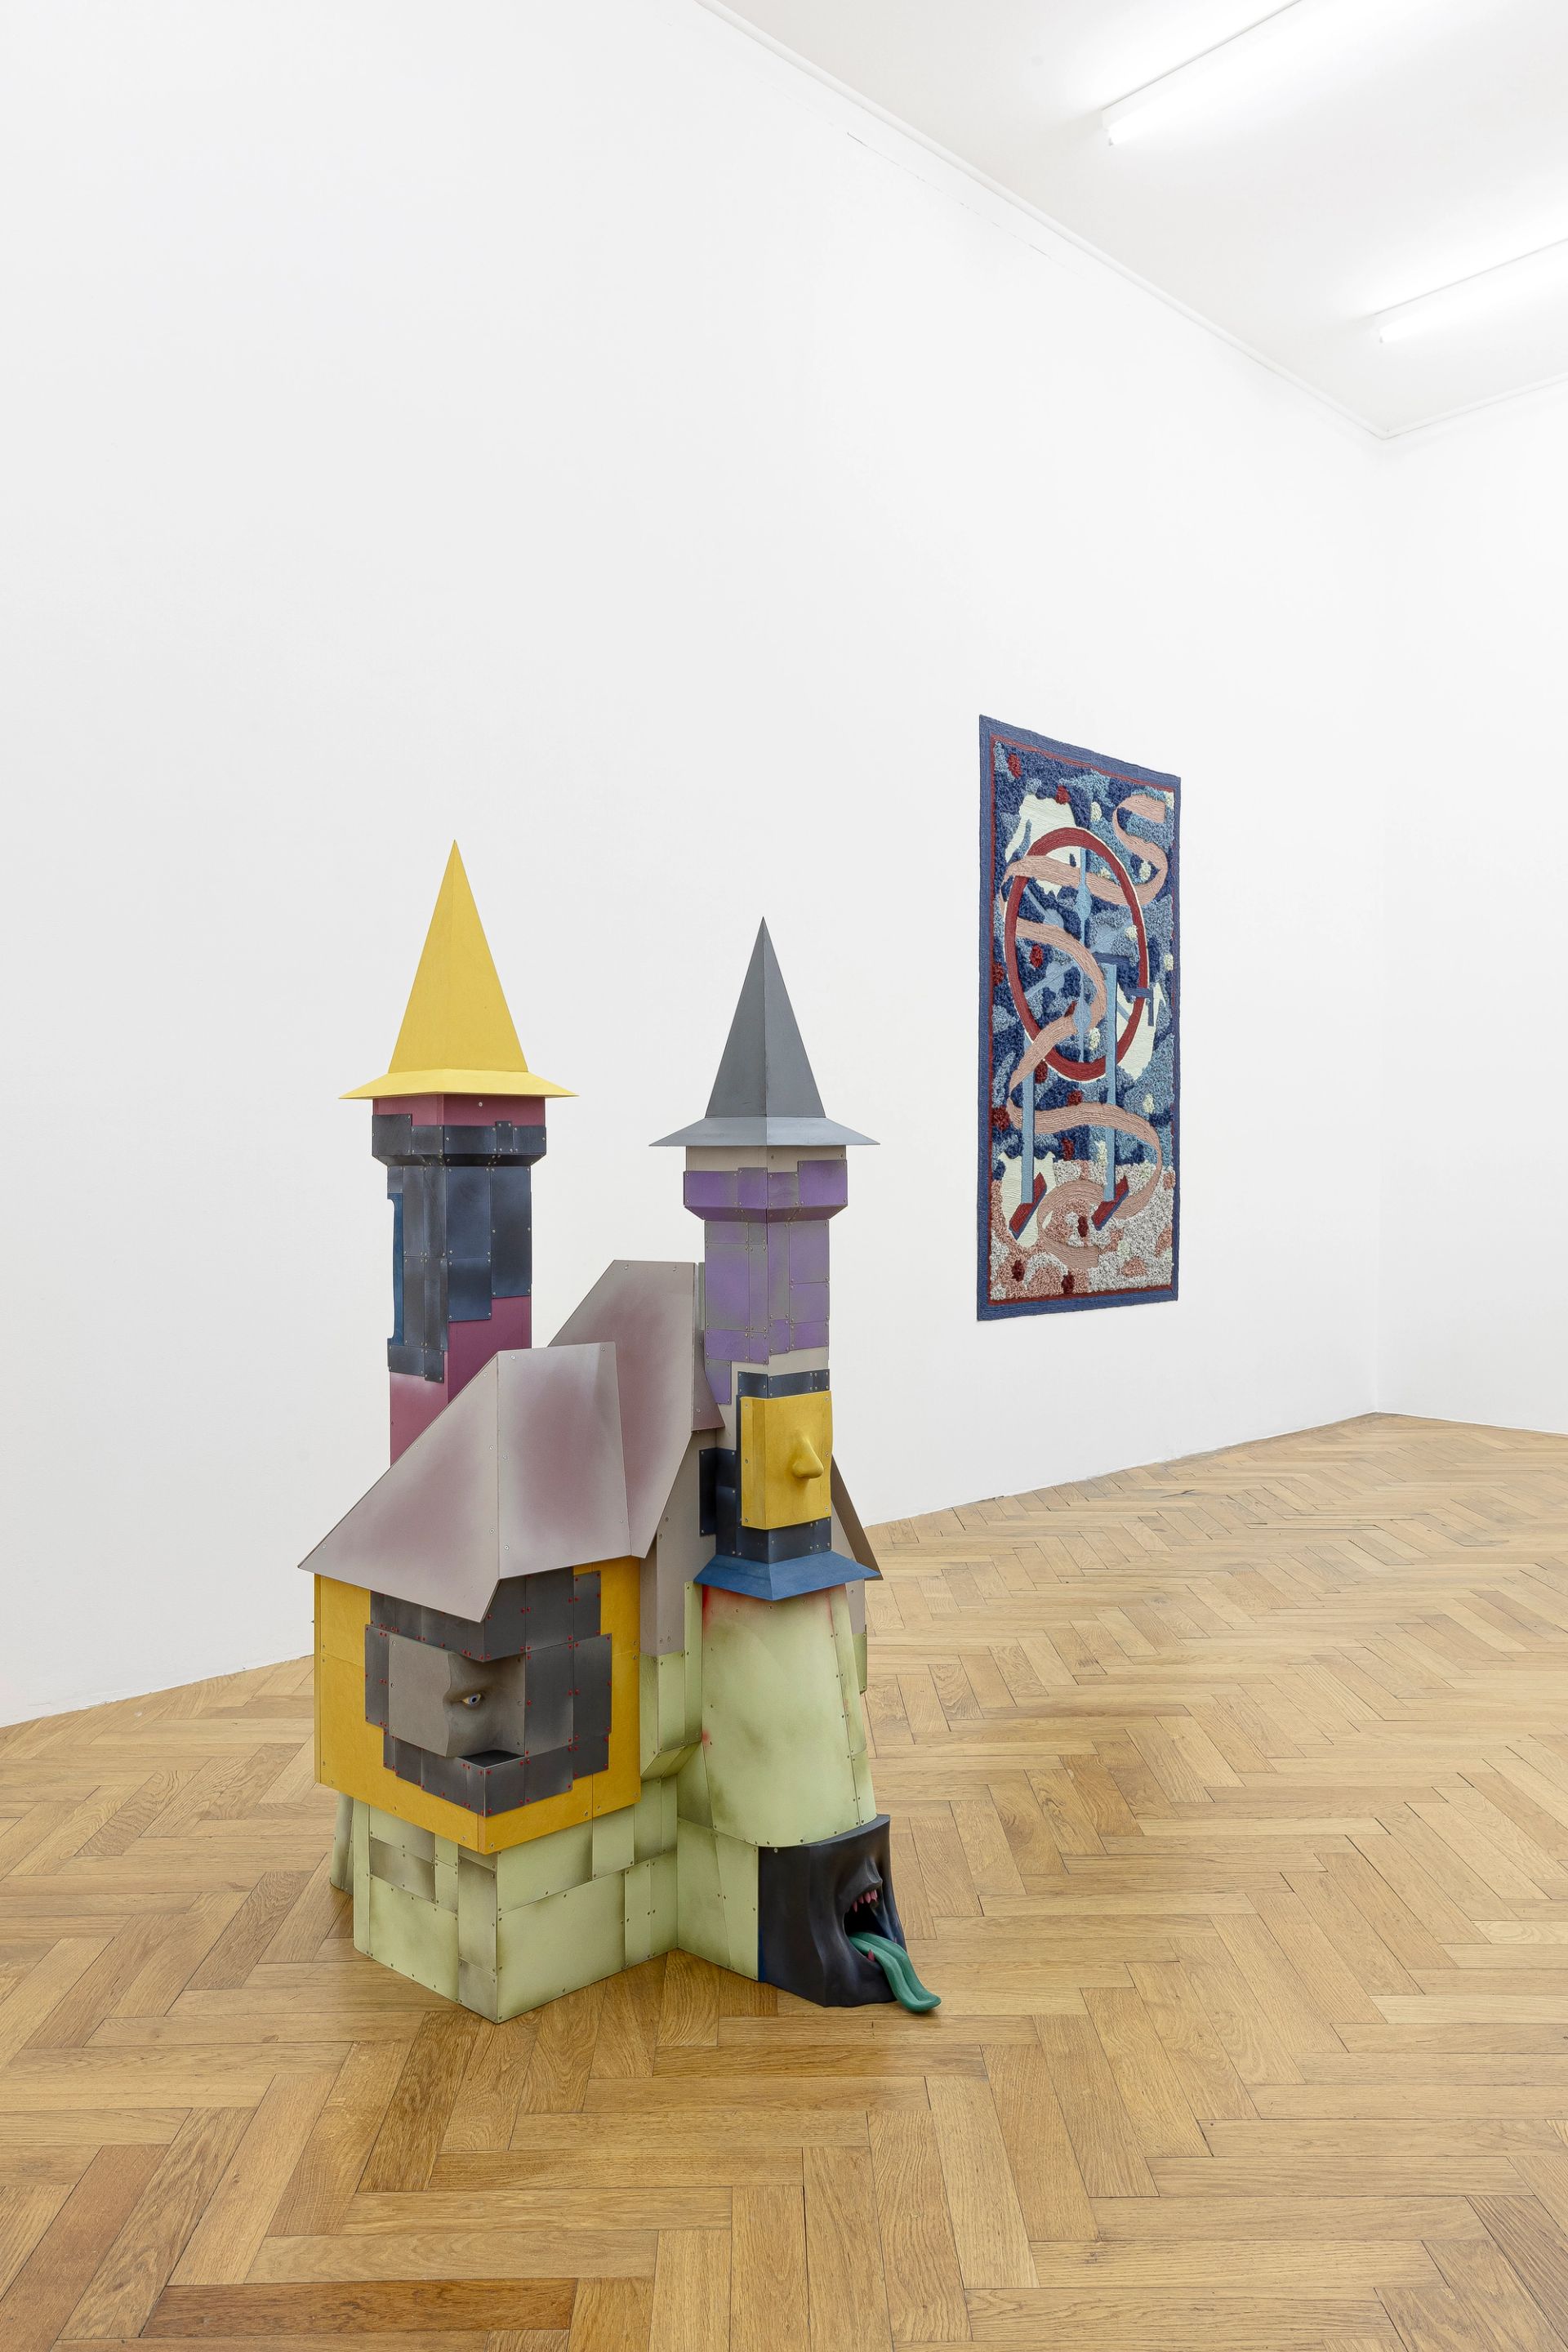 Throw of the dice, Lukas Hoffmann & Sophia Mainka, 2024, in collaboration with GiG Munich, exhibition view at Sperling